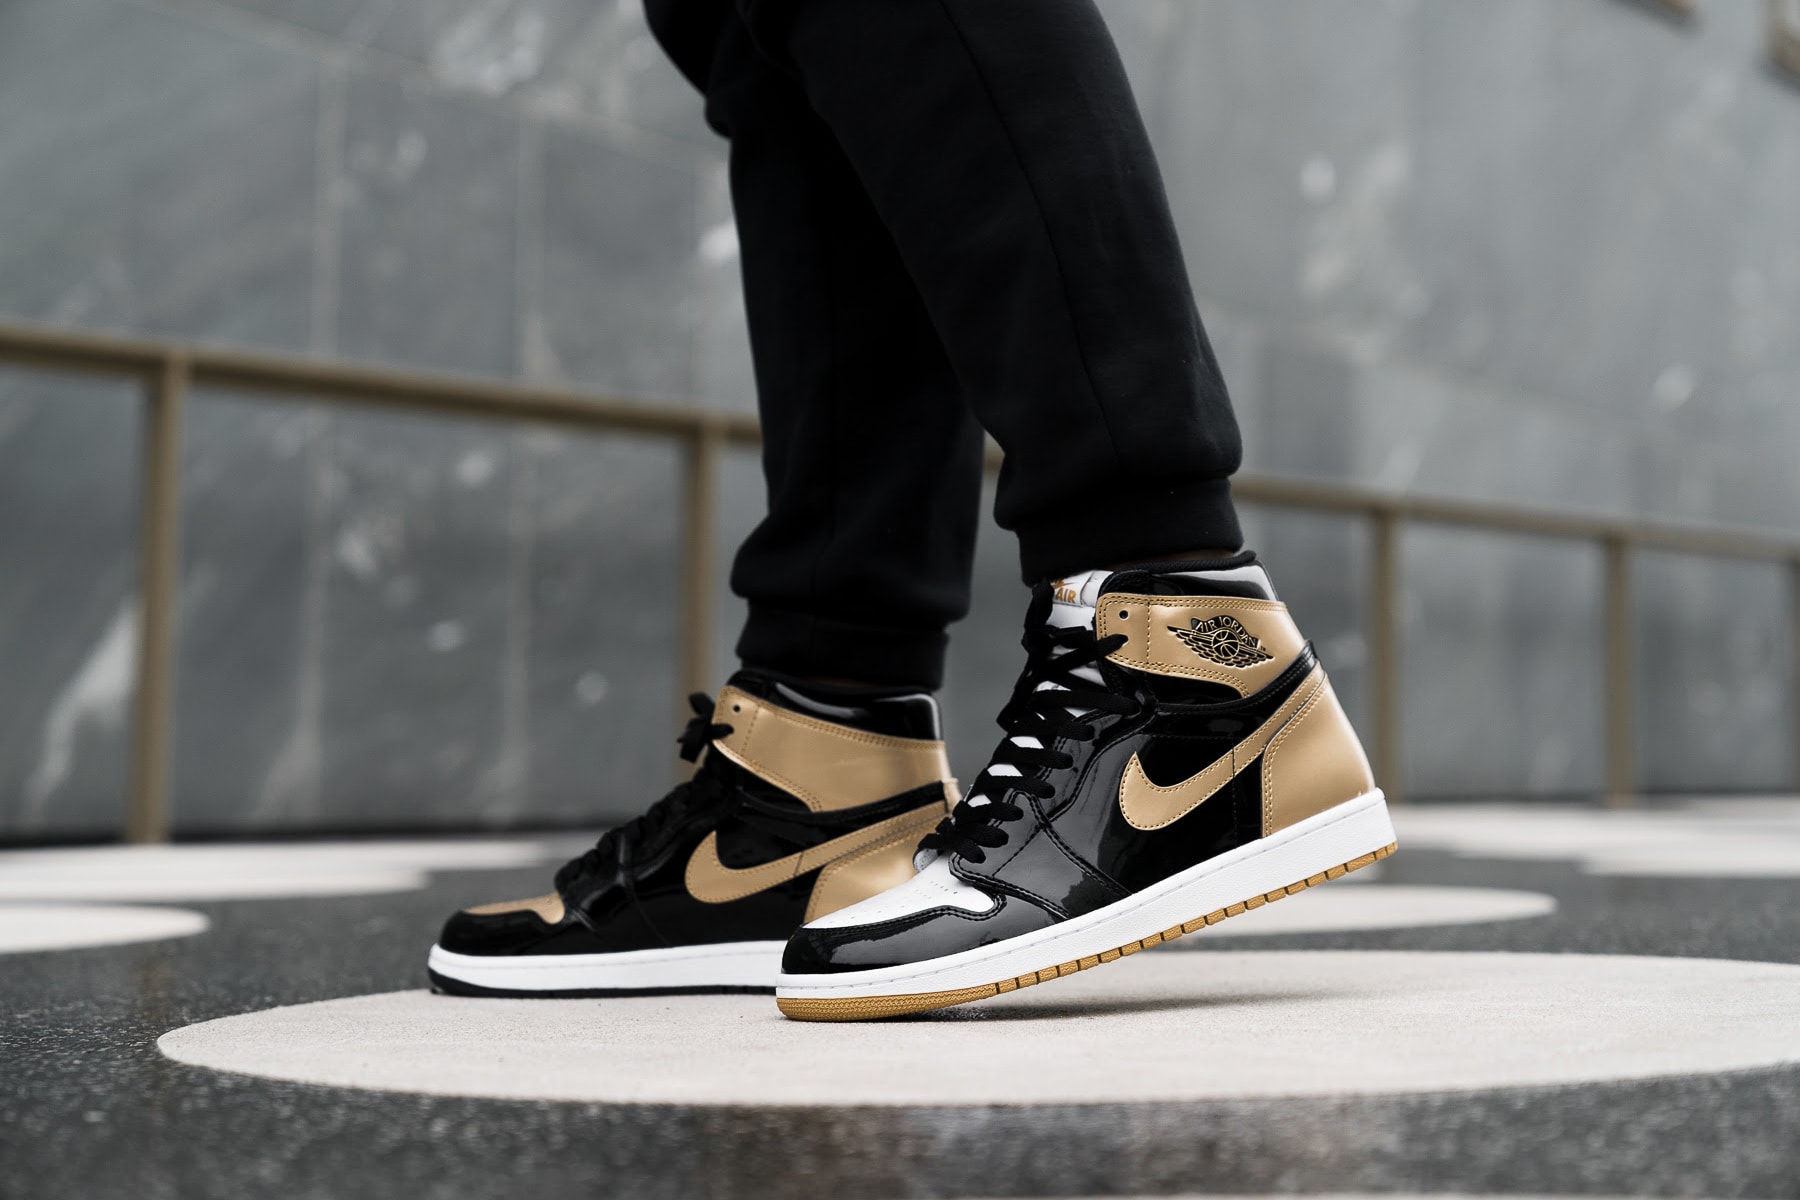 Air Jordan 1 Top 3 union complex con union LA nike Jordans Top three all patent leather gold sneaker shoes on-feet gold top three style jordan 1 High OG energy